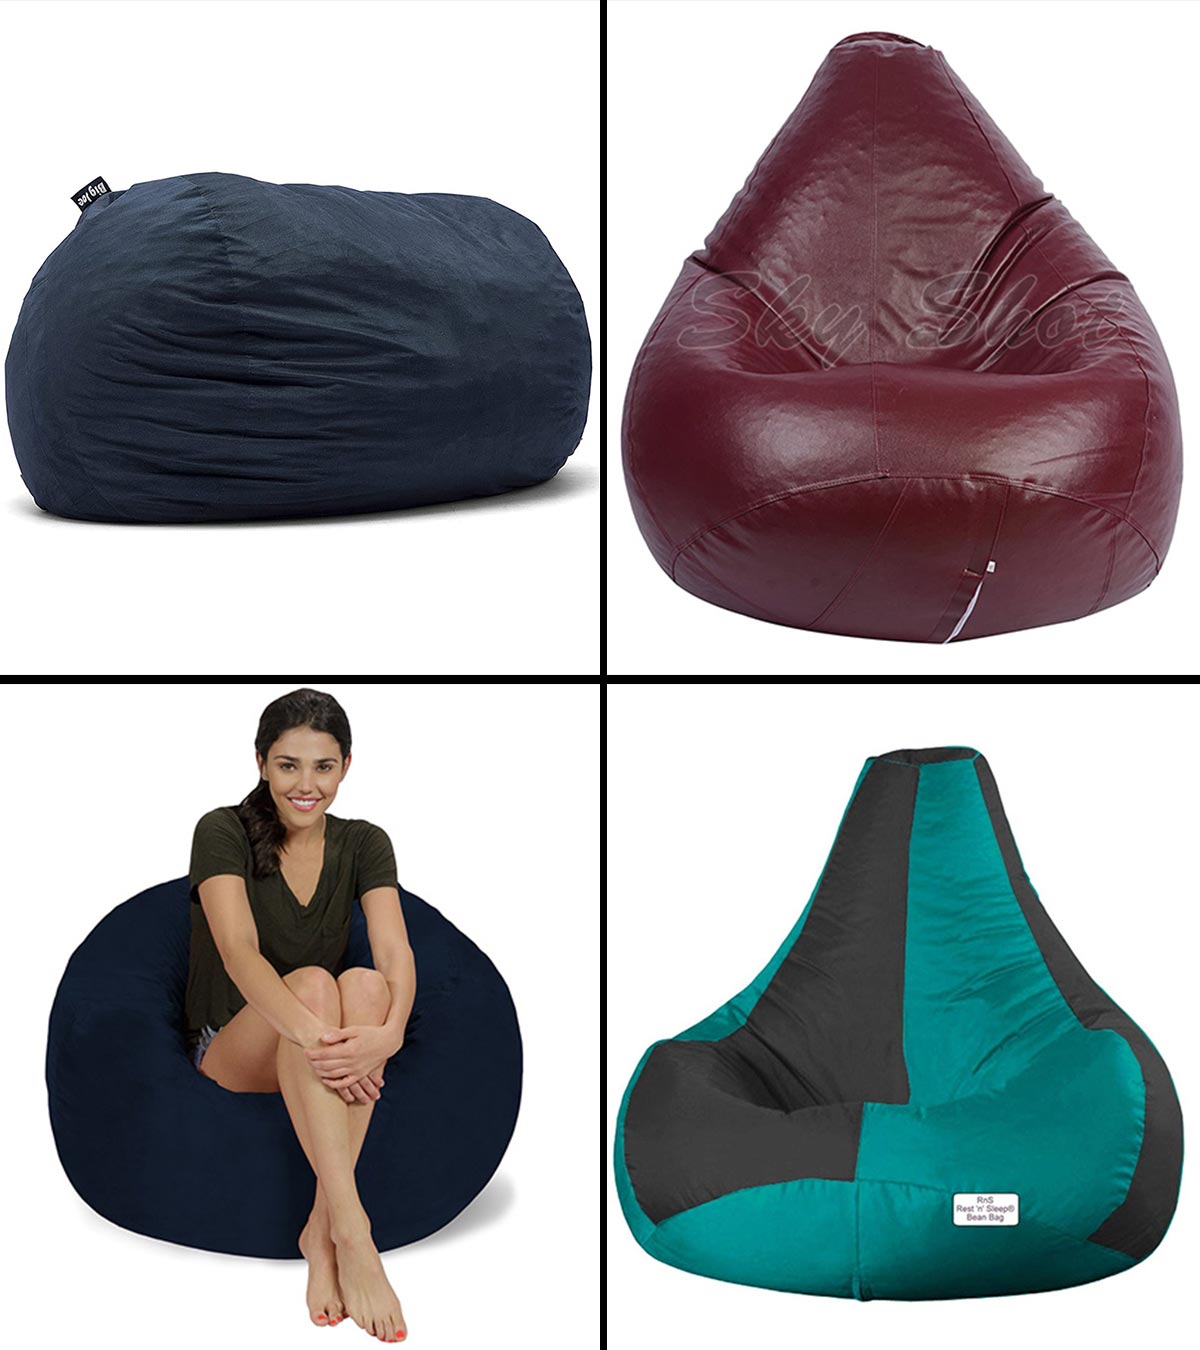 Buy Luxury Furr Bean Bag Cover For Adults (Maroon, xxxl) at 68% OFF Online  | Wooden Street